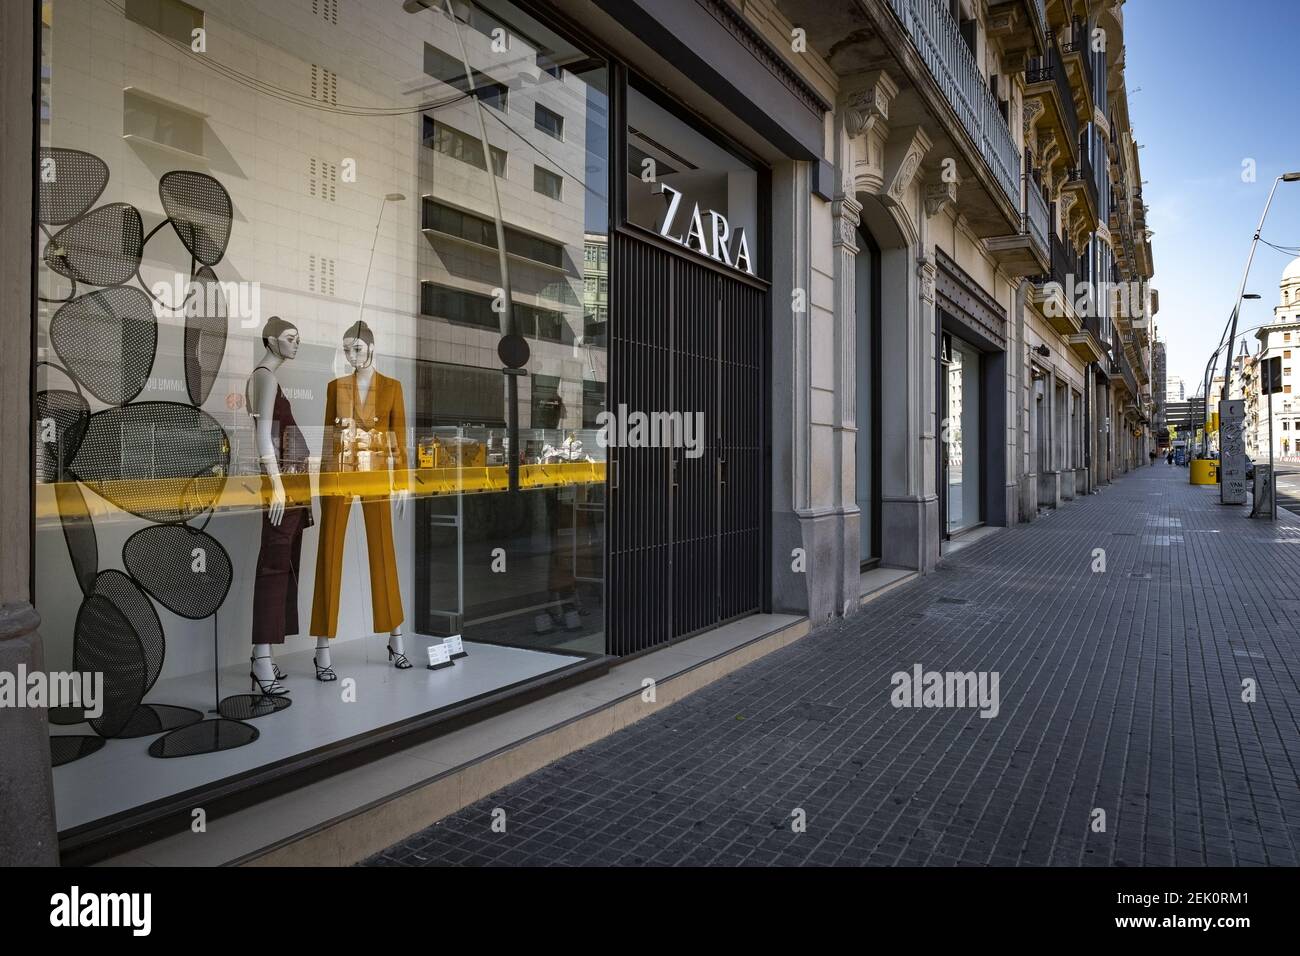 A closed Zara clothing chain store seen on an empty Pelayo street during  the coronavirus crisis.Barcelona faces the 42nd day of confinement and  social distancing. Only authorized establishments are open to the public.  The streets remain empty without ...